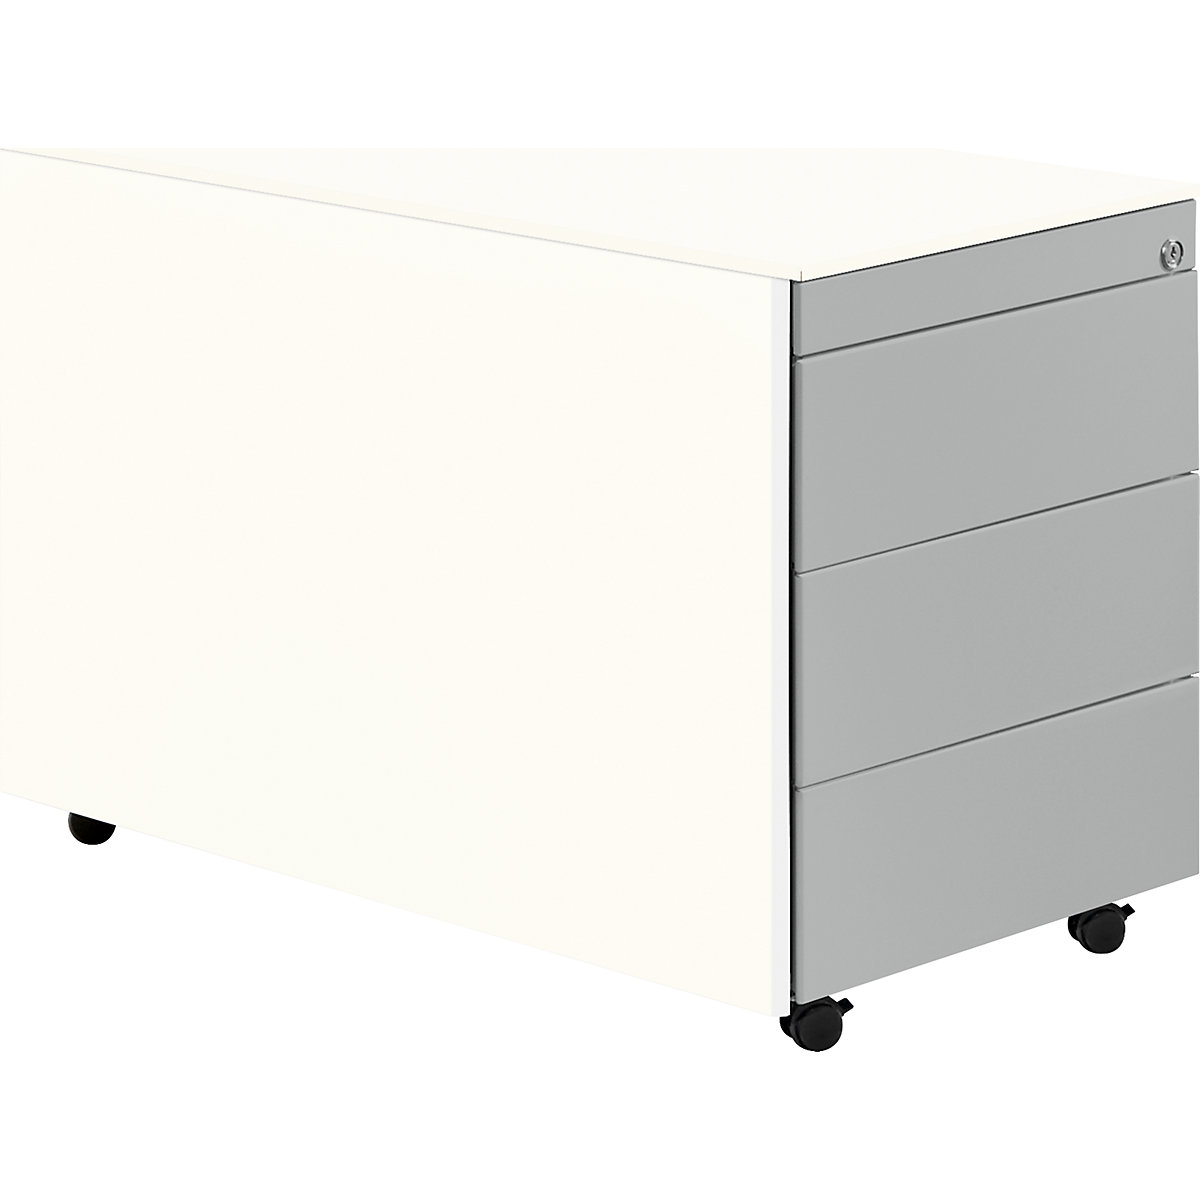 Drawer pedestal with castors – mauser, HxD 570 x 800 mm, steel top, 3 drawers, pure white / white aluminium / white-12